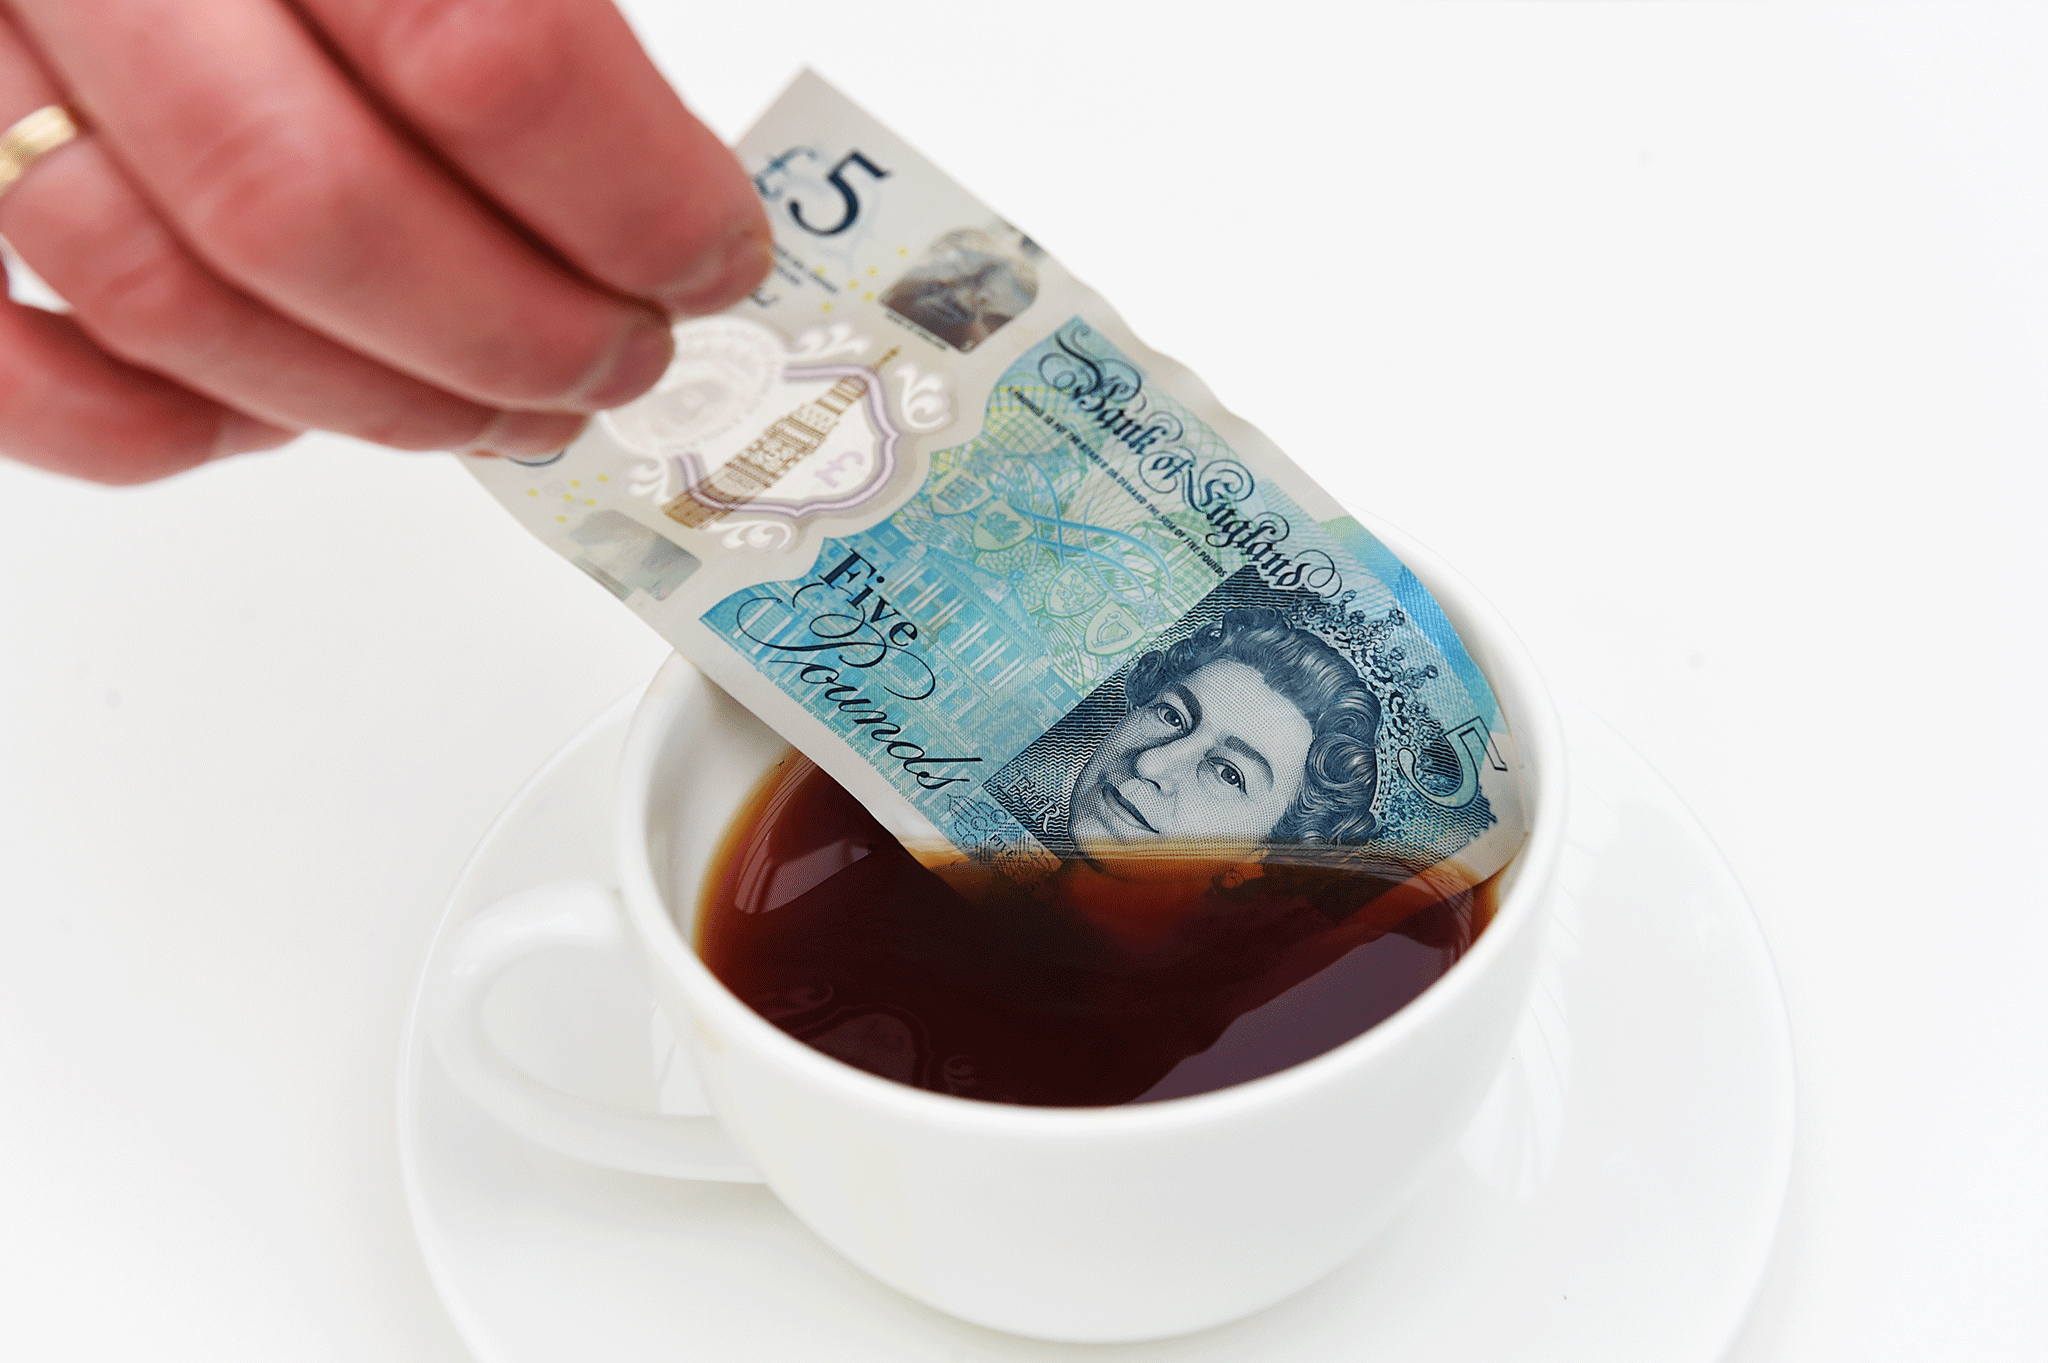 A spilled drink should have little effect on the new notes, which can be wiped clean and will even survive a standard laundry cycle with “minimal damage”, according to the Bank